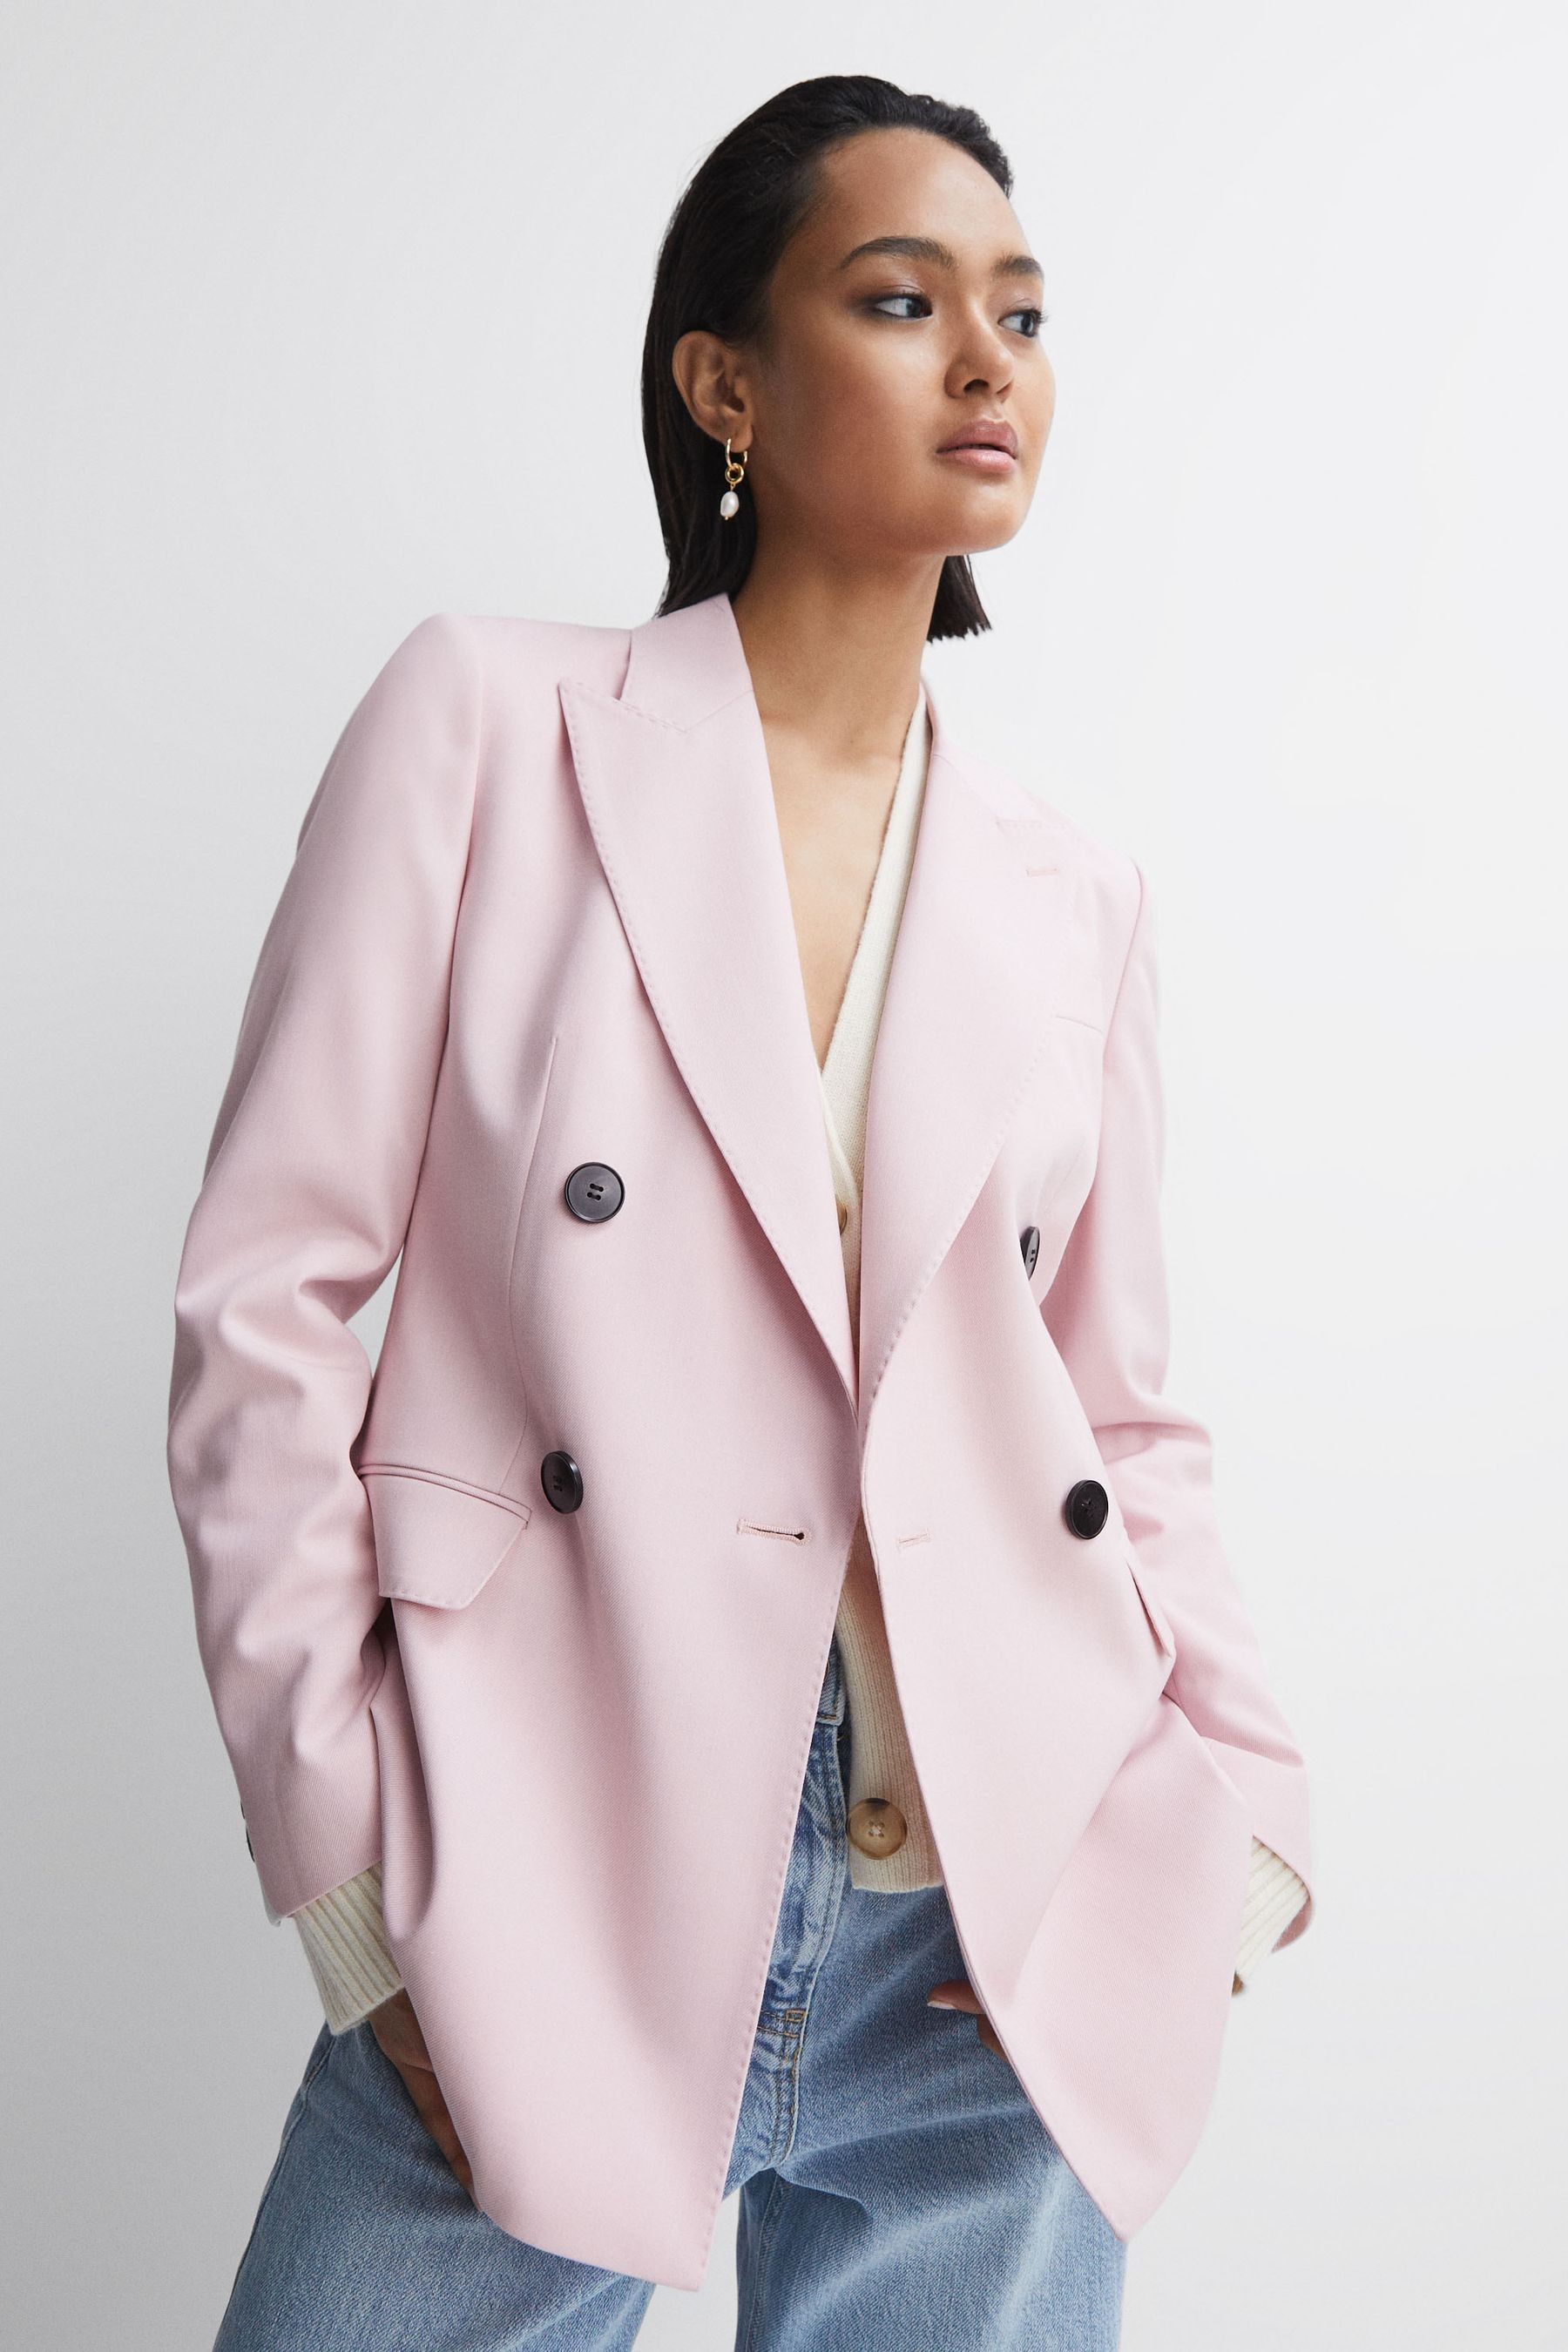 Reiss Evelyn - Pink Tailored Wool Blend Double Breasted Blazer, Us 2